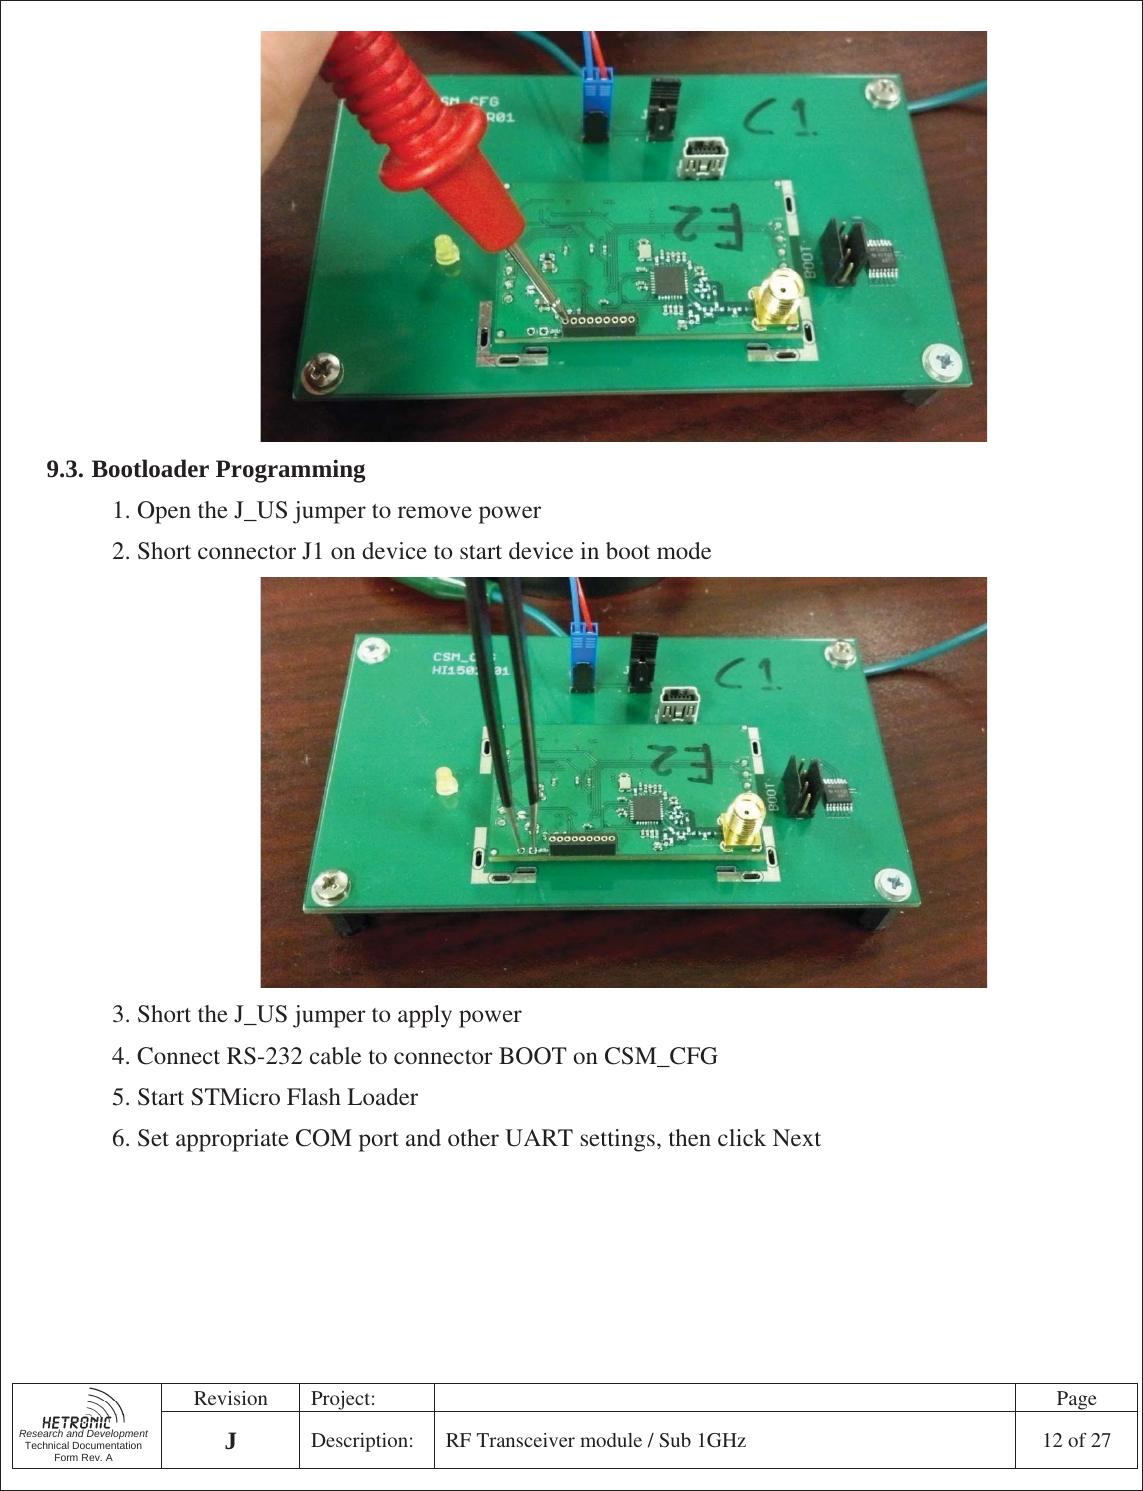   Research and Development Technical Documentation Form Rev. A Revision Project:    Page JDescription:  RF Transceiver module / Sub 1GHz  12 of 27   9.3. Bootloader Programming 1. Open the J_US jumper to remove power 2. Short connector J1 on device to start device in boot mode  3. Short the J_US jumper to apply power 4. Connect RS-232 cable to connector BOOT on CSM_CFG 5. Start STMicro Flash Loader 6. Set appropriate COM port and other UART settings, then click Next 